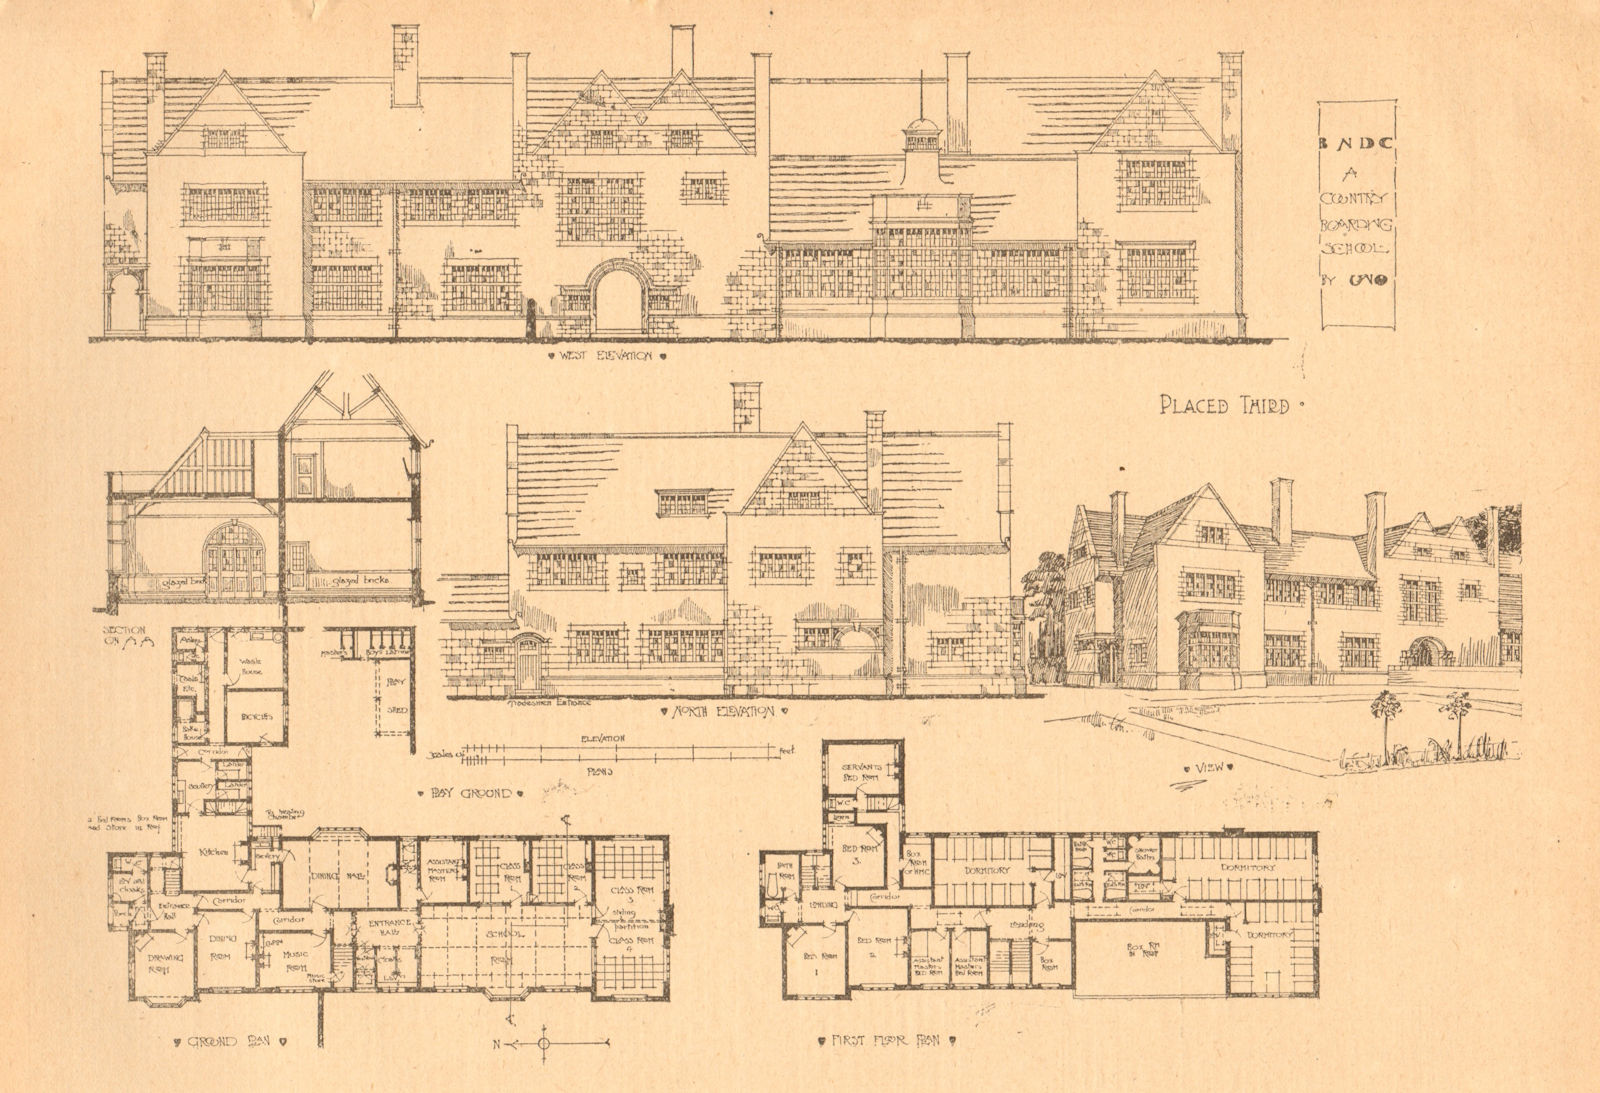 Associate Product A Country Boarding School by Uno. Elevations, Ground & 1st floor plan 1901